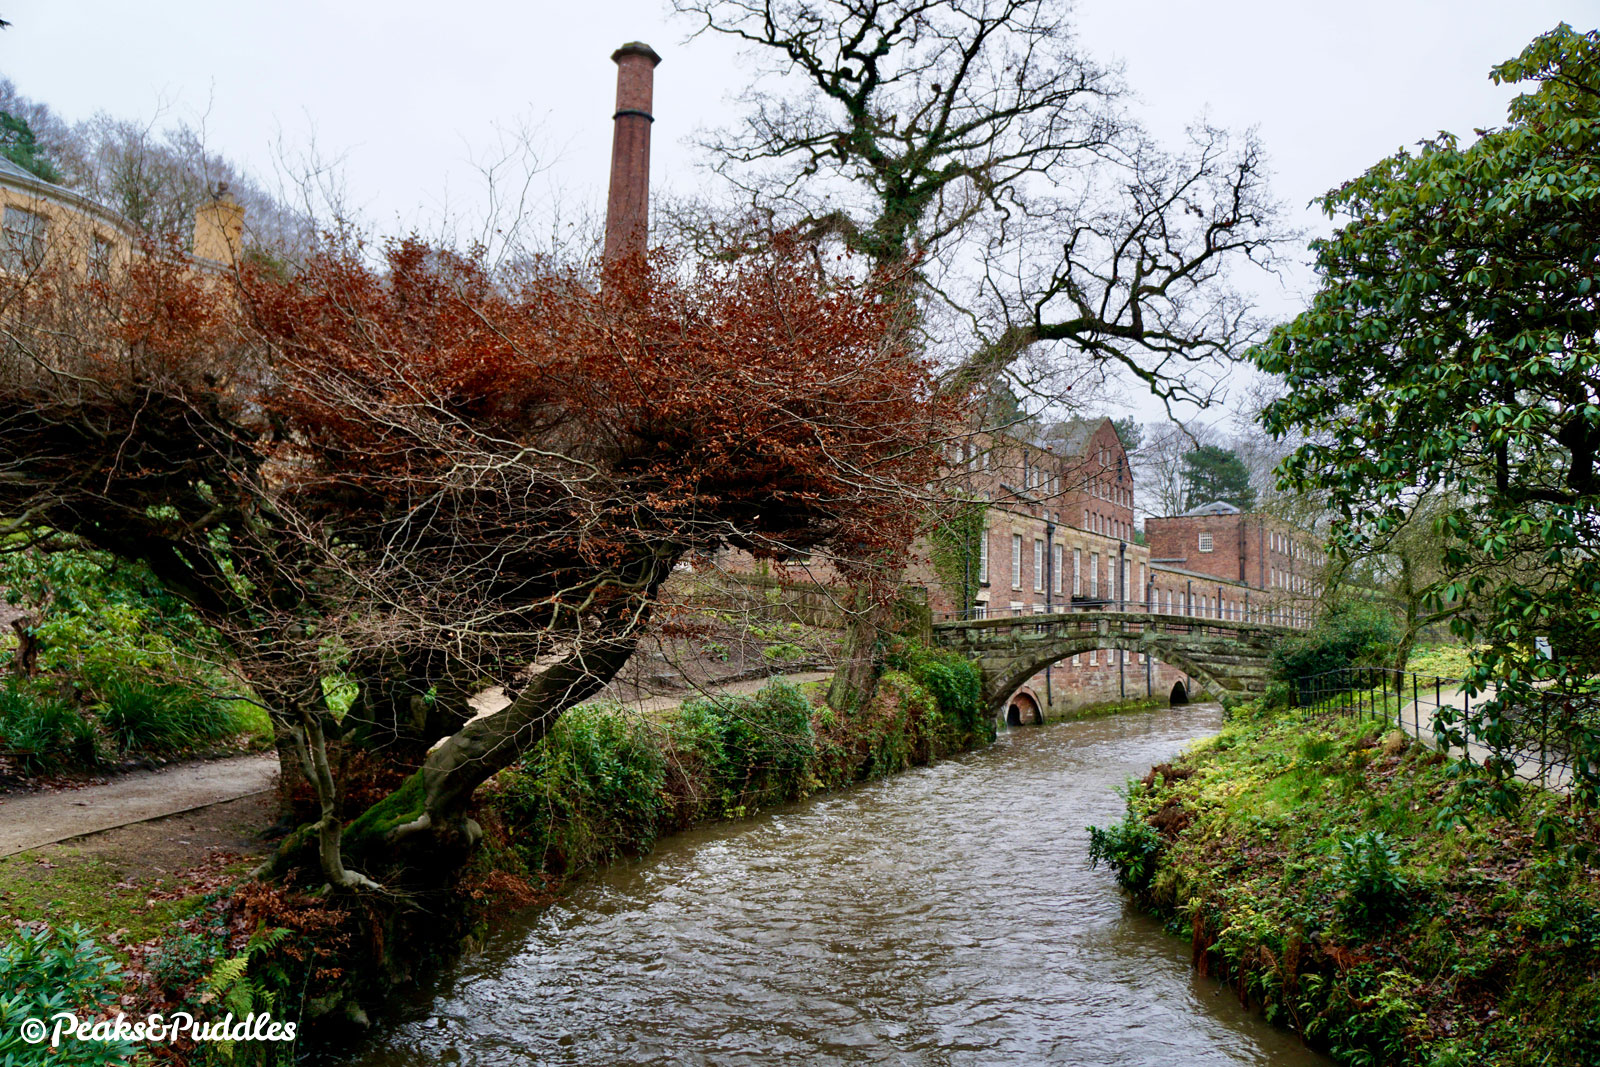 Looking towards Quarry Bank Mill from within its adjoining gardens (entry fee required), next to the raging River Bollin.